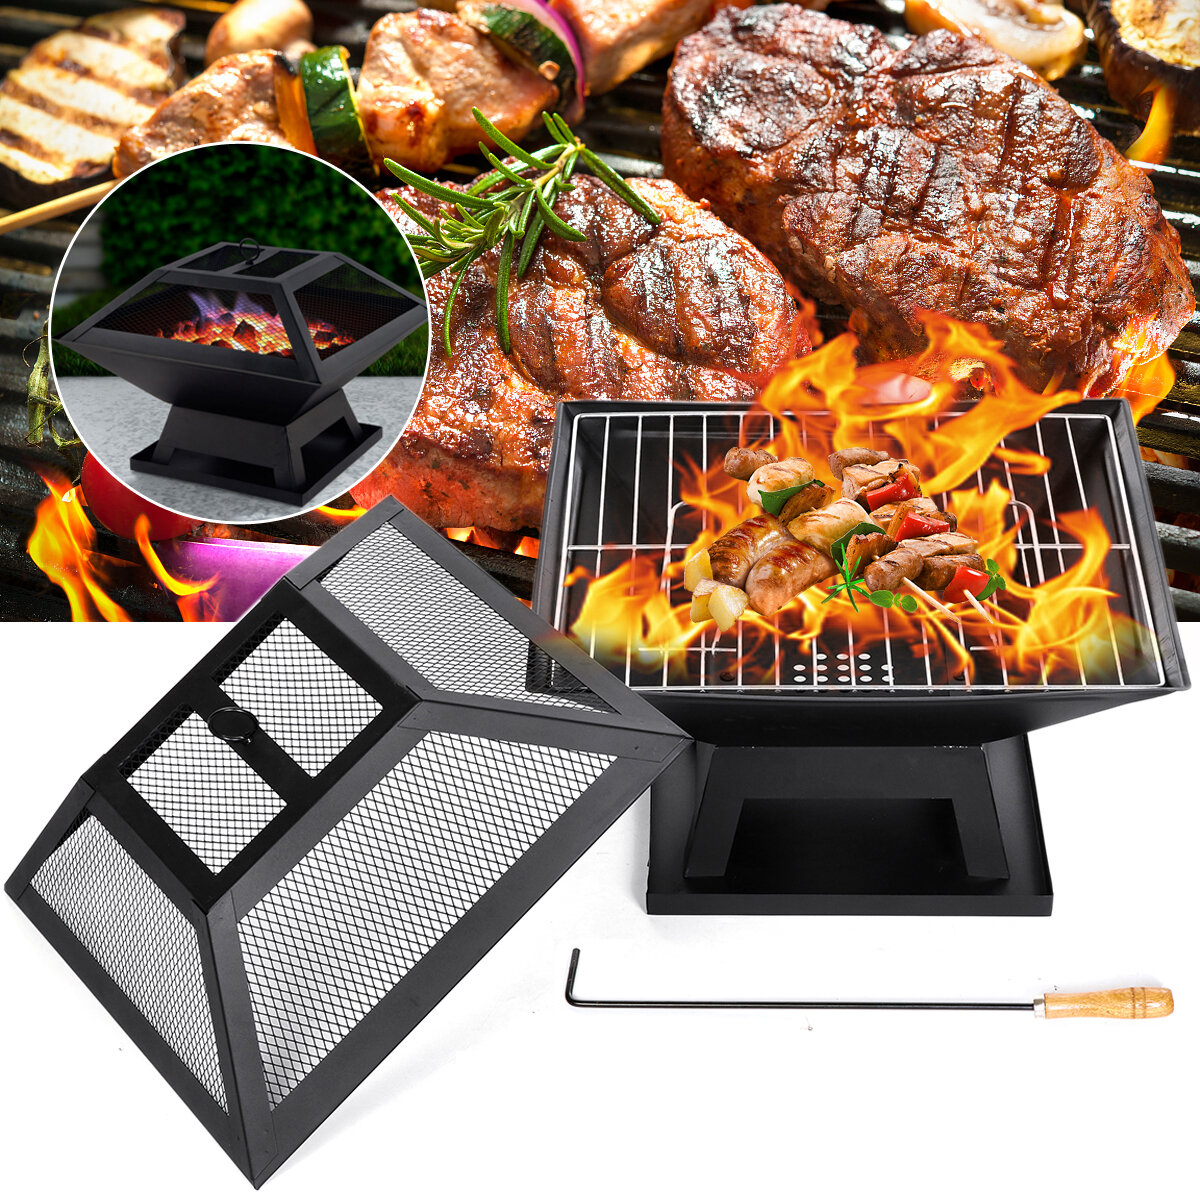 18.5x18.5x5.31inch 2-in-1 BBQ Grill Heater Fire Pit Square Firepit Brazier Outdoor Camping Picnic Garden